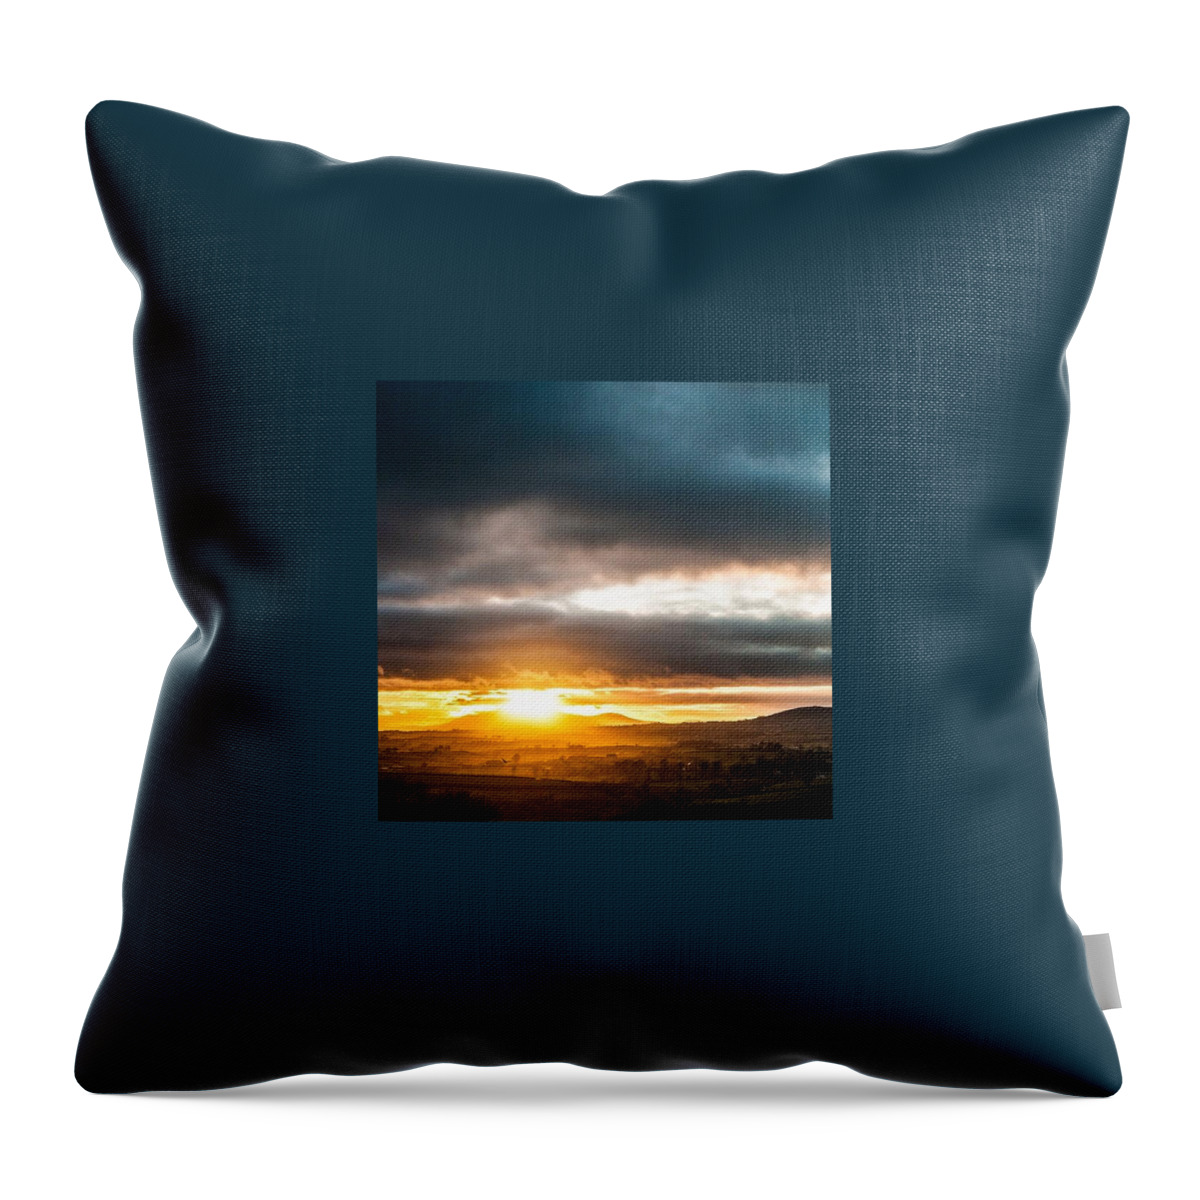 Evening Throw Pillow featuring the photograph Northern Ireland by Aleck Cartwright